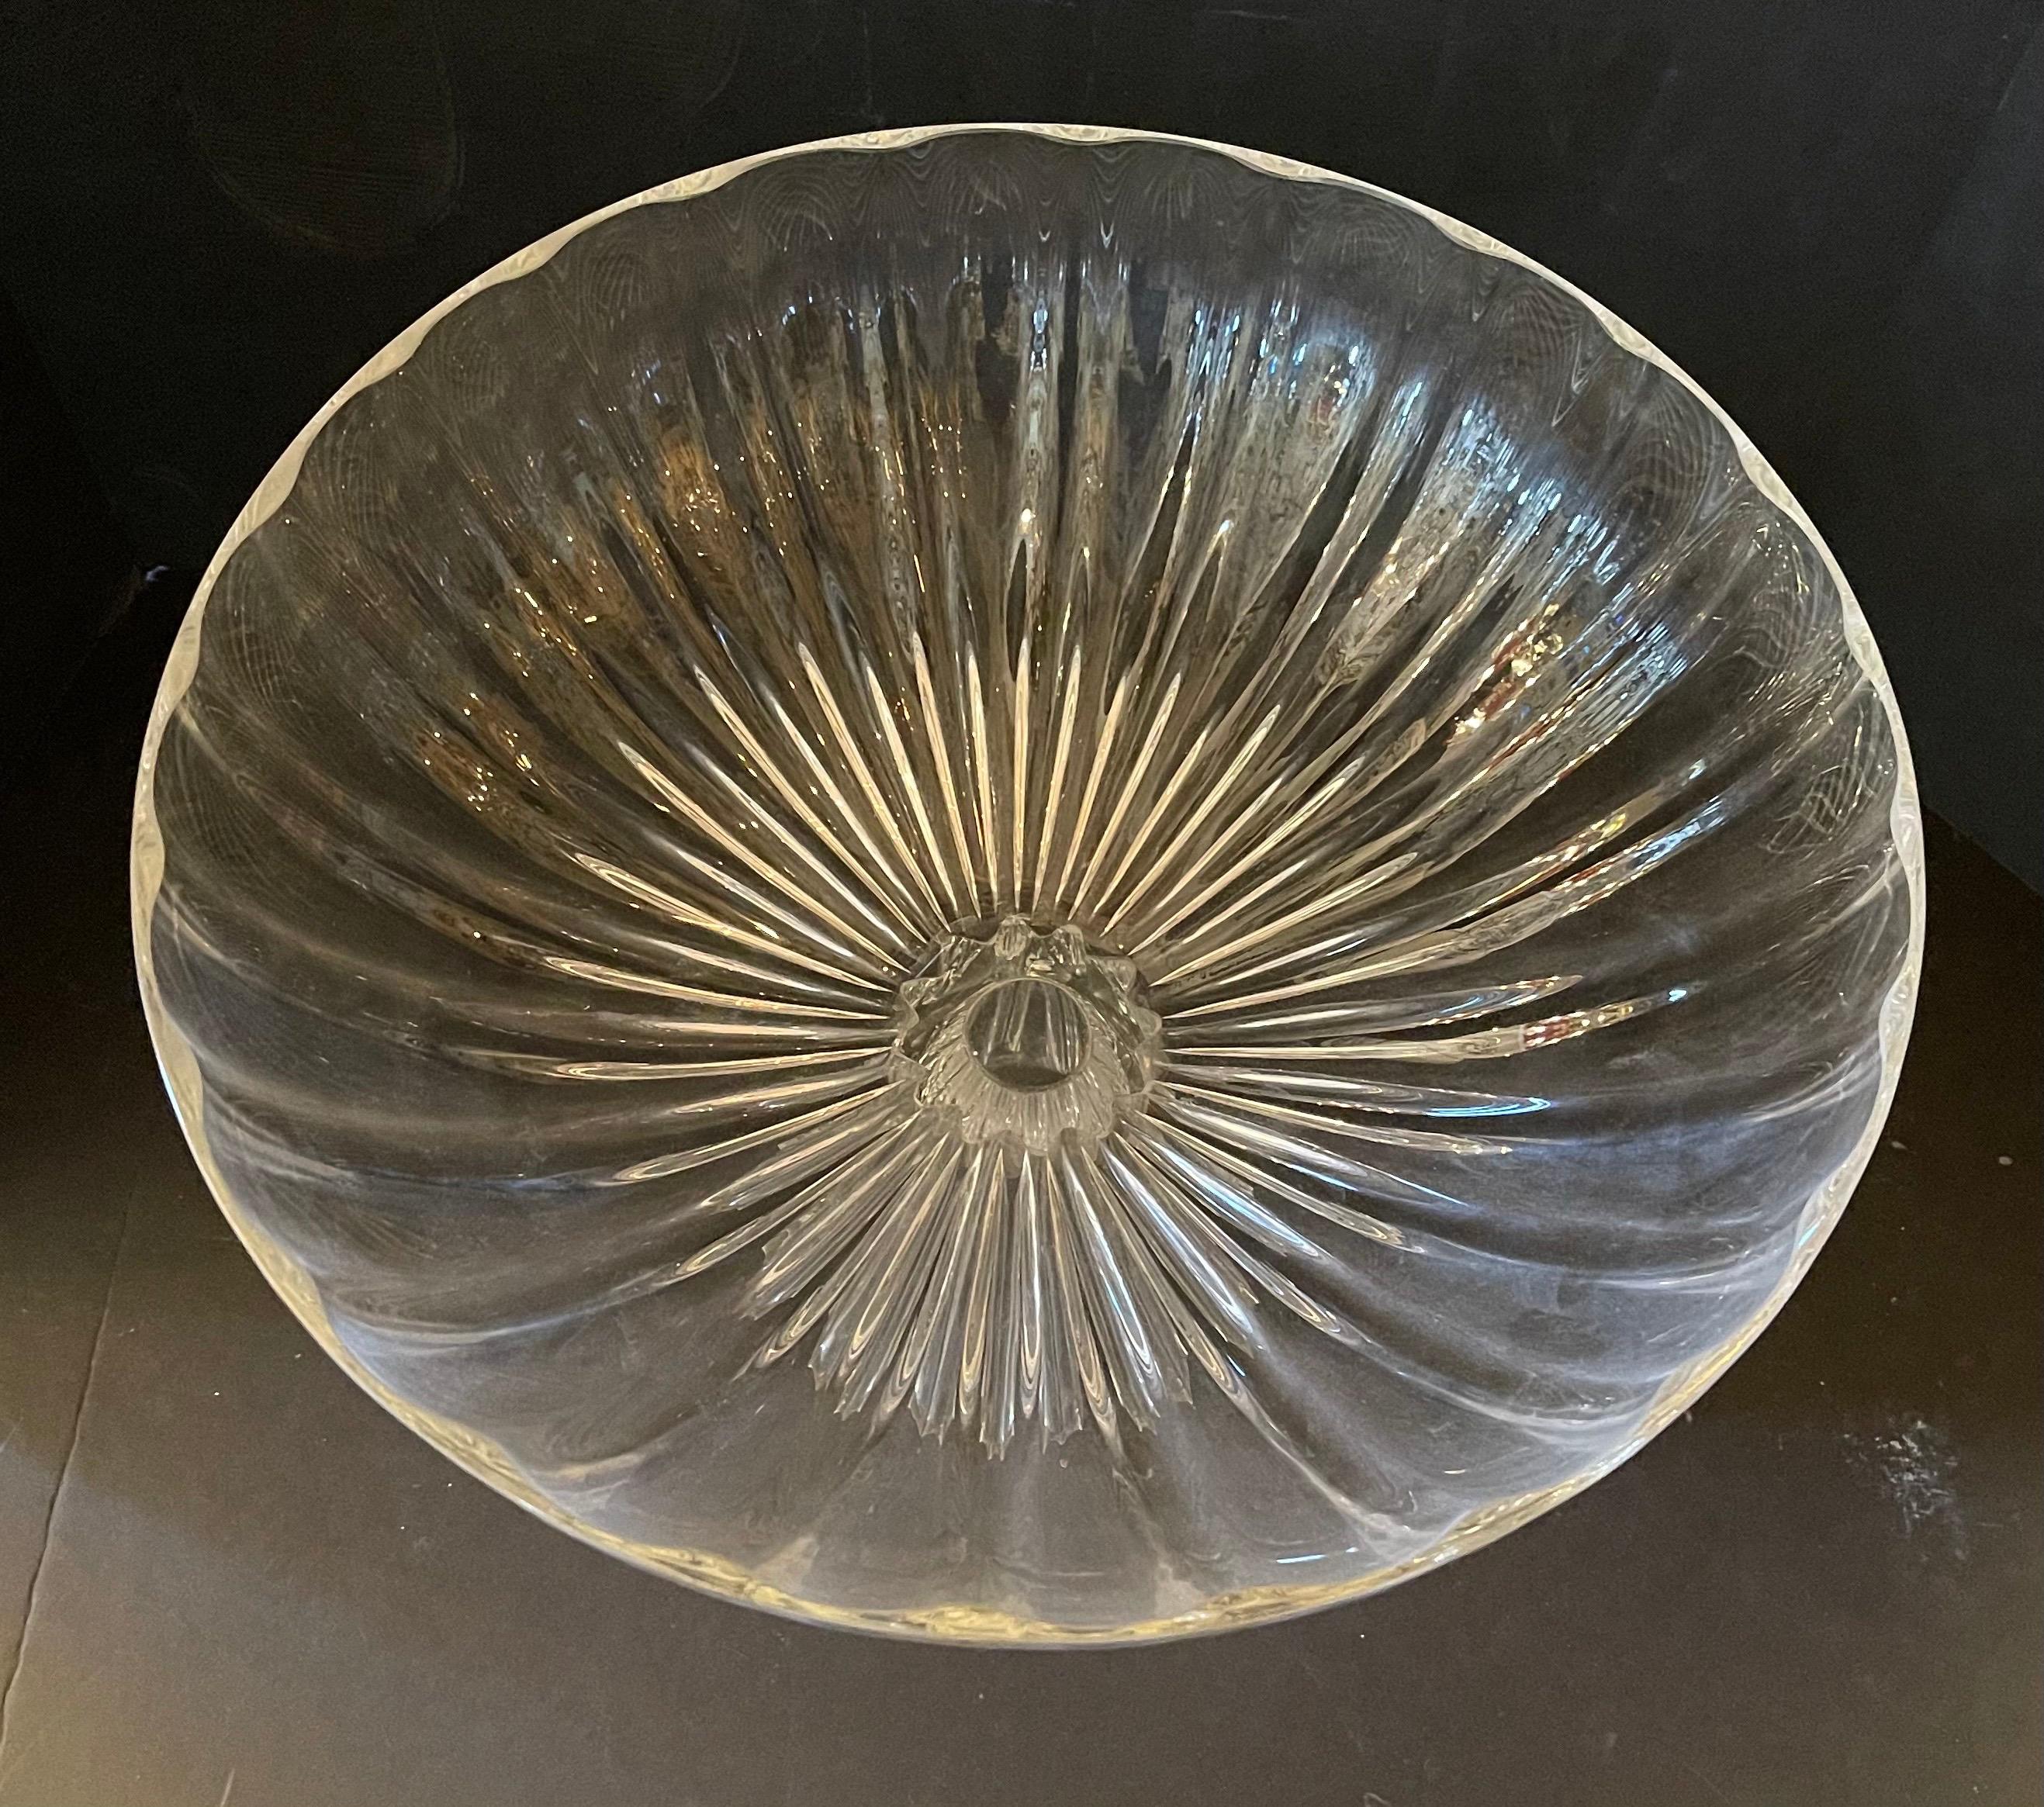 Wonderful Lorin Marsh Rigadin bowl clear Murano hand blown art glass centerpiece large bowl
Item#: 4771, made in Italy
Measurements: 15